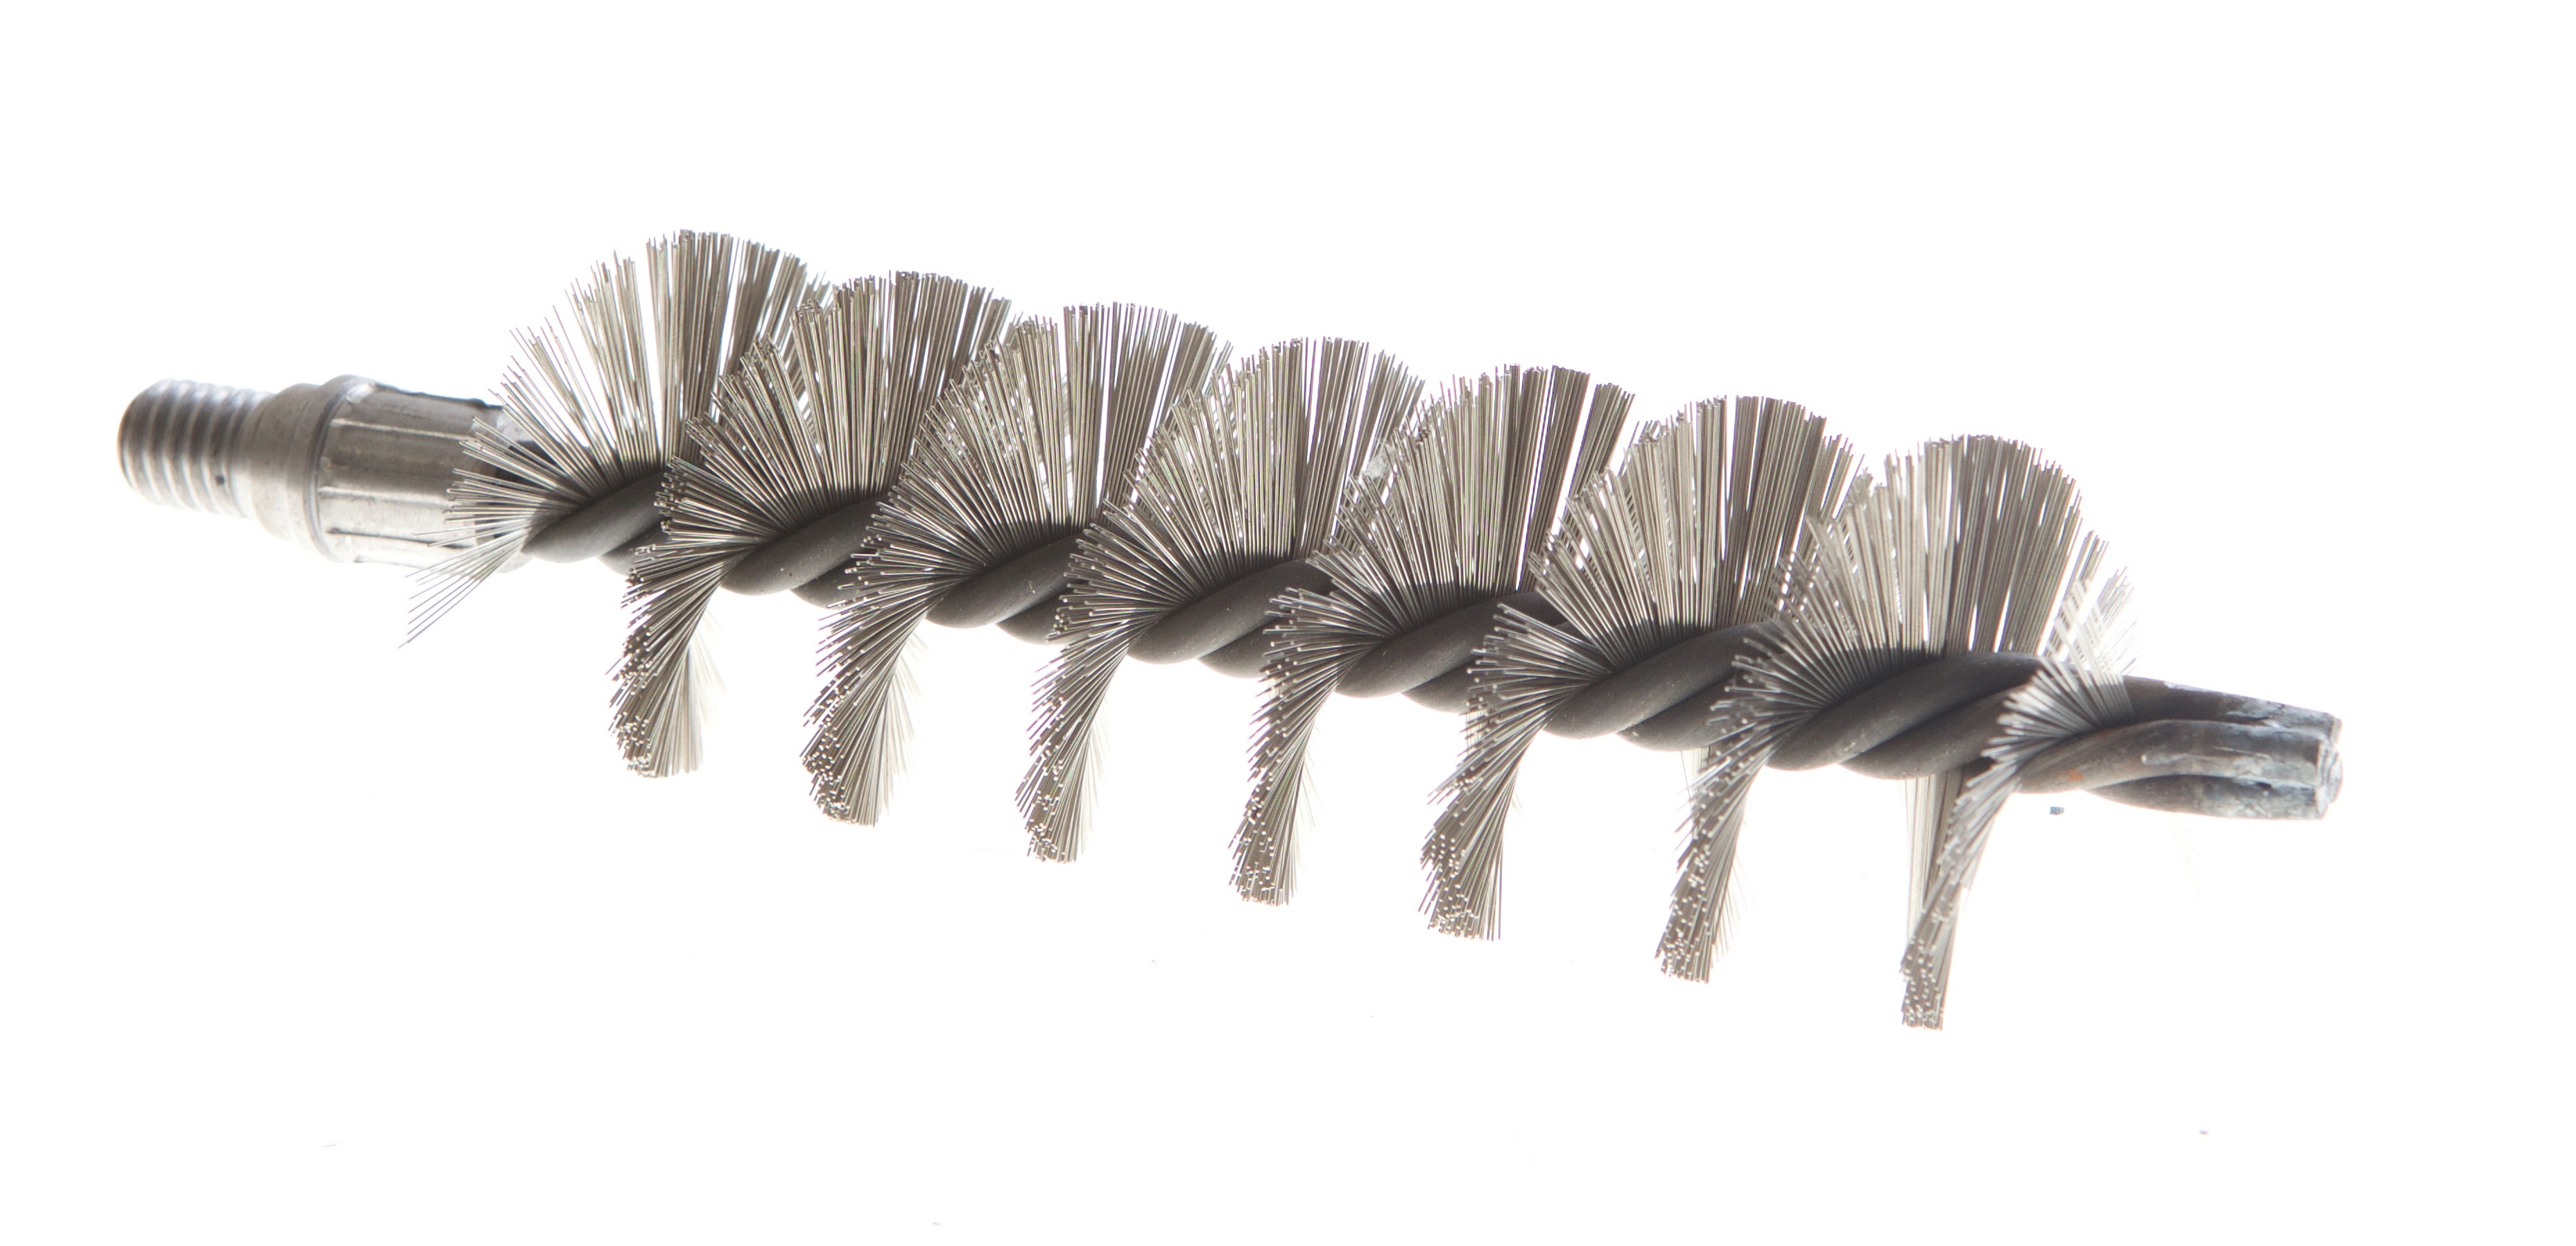 2" Dia. x 6" LG Stainless Steel Tube Brush 1/2" Whit Male Con.